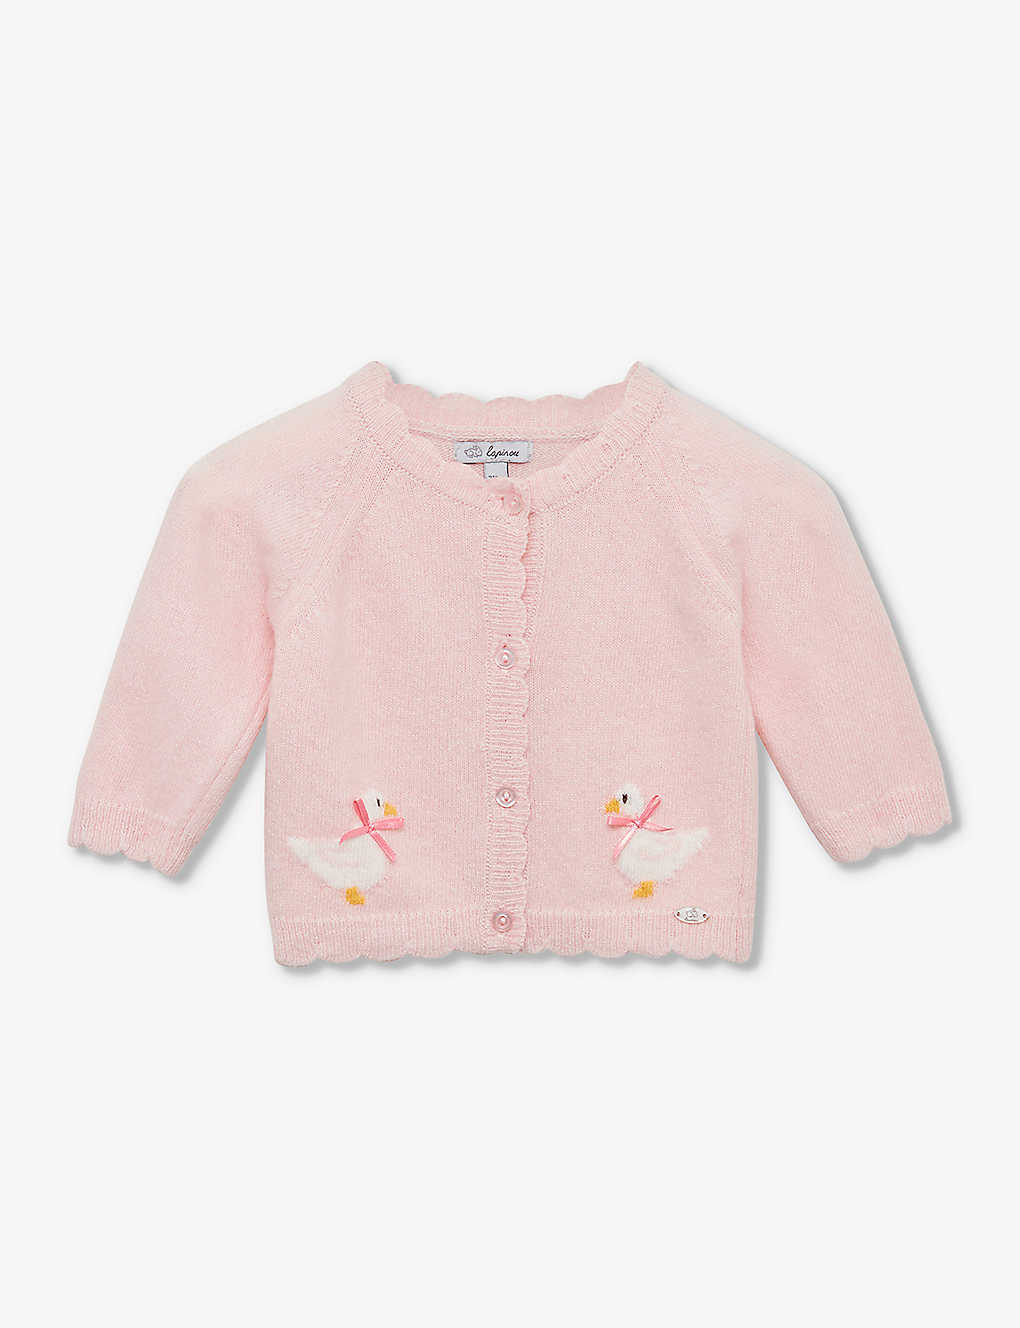 Trotters Girls Pale Pink Kids Jemima Duck-intarsia Knitted Cardigan 0-9 Months